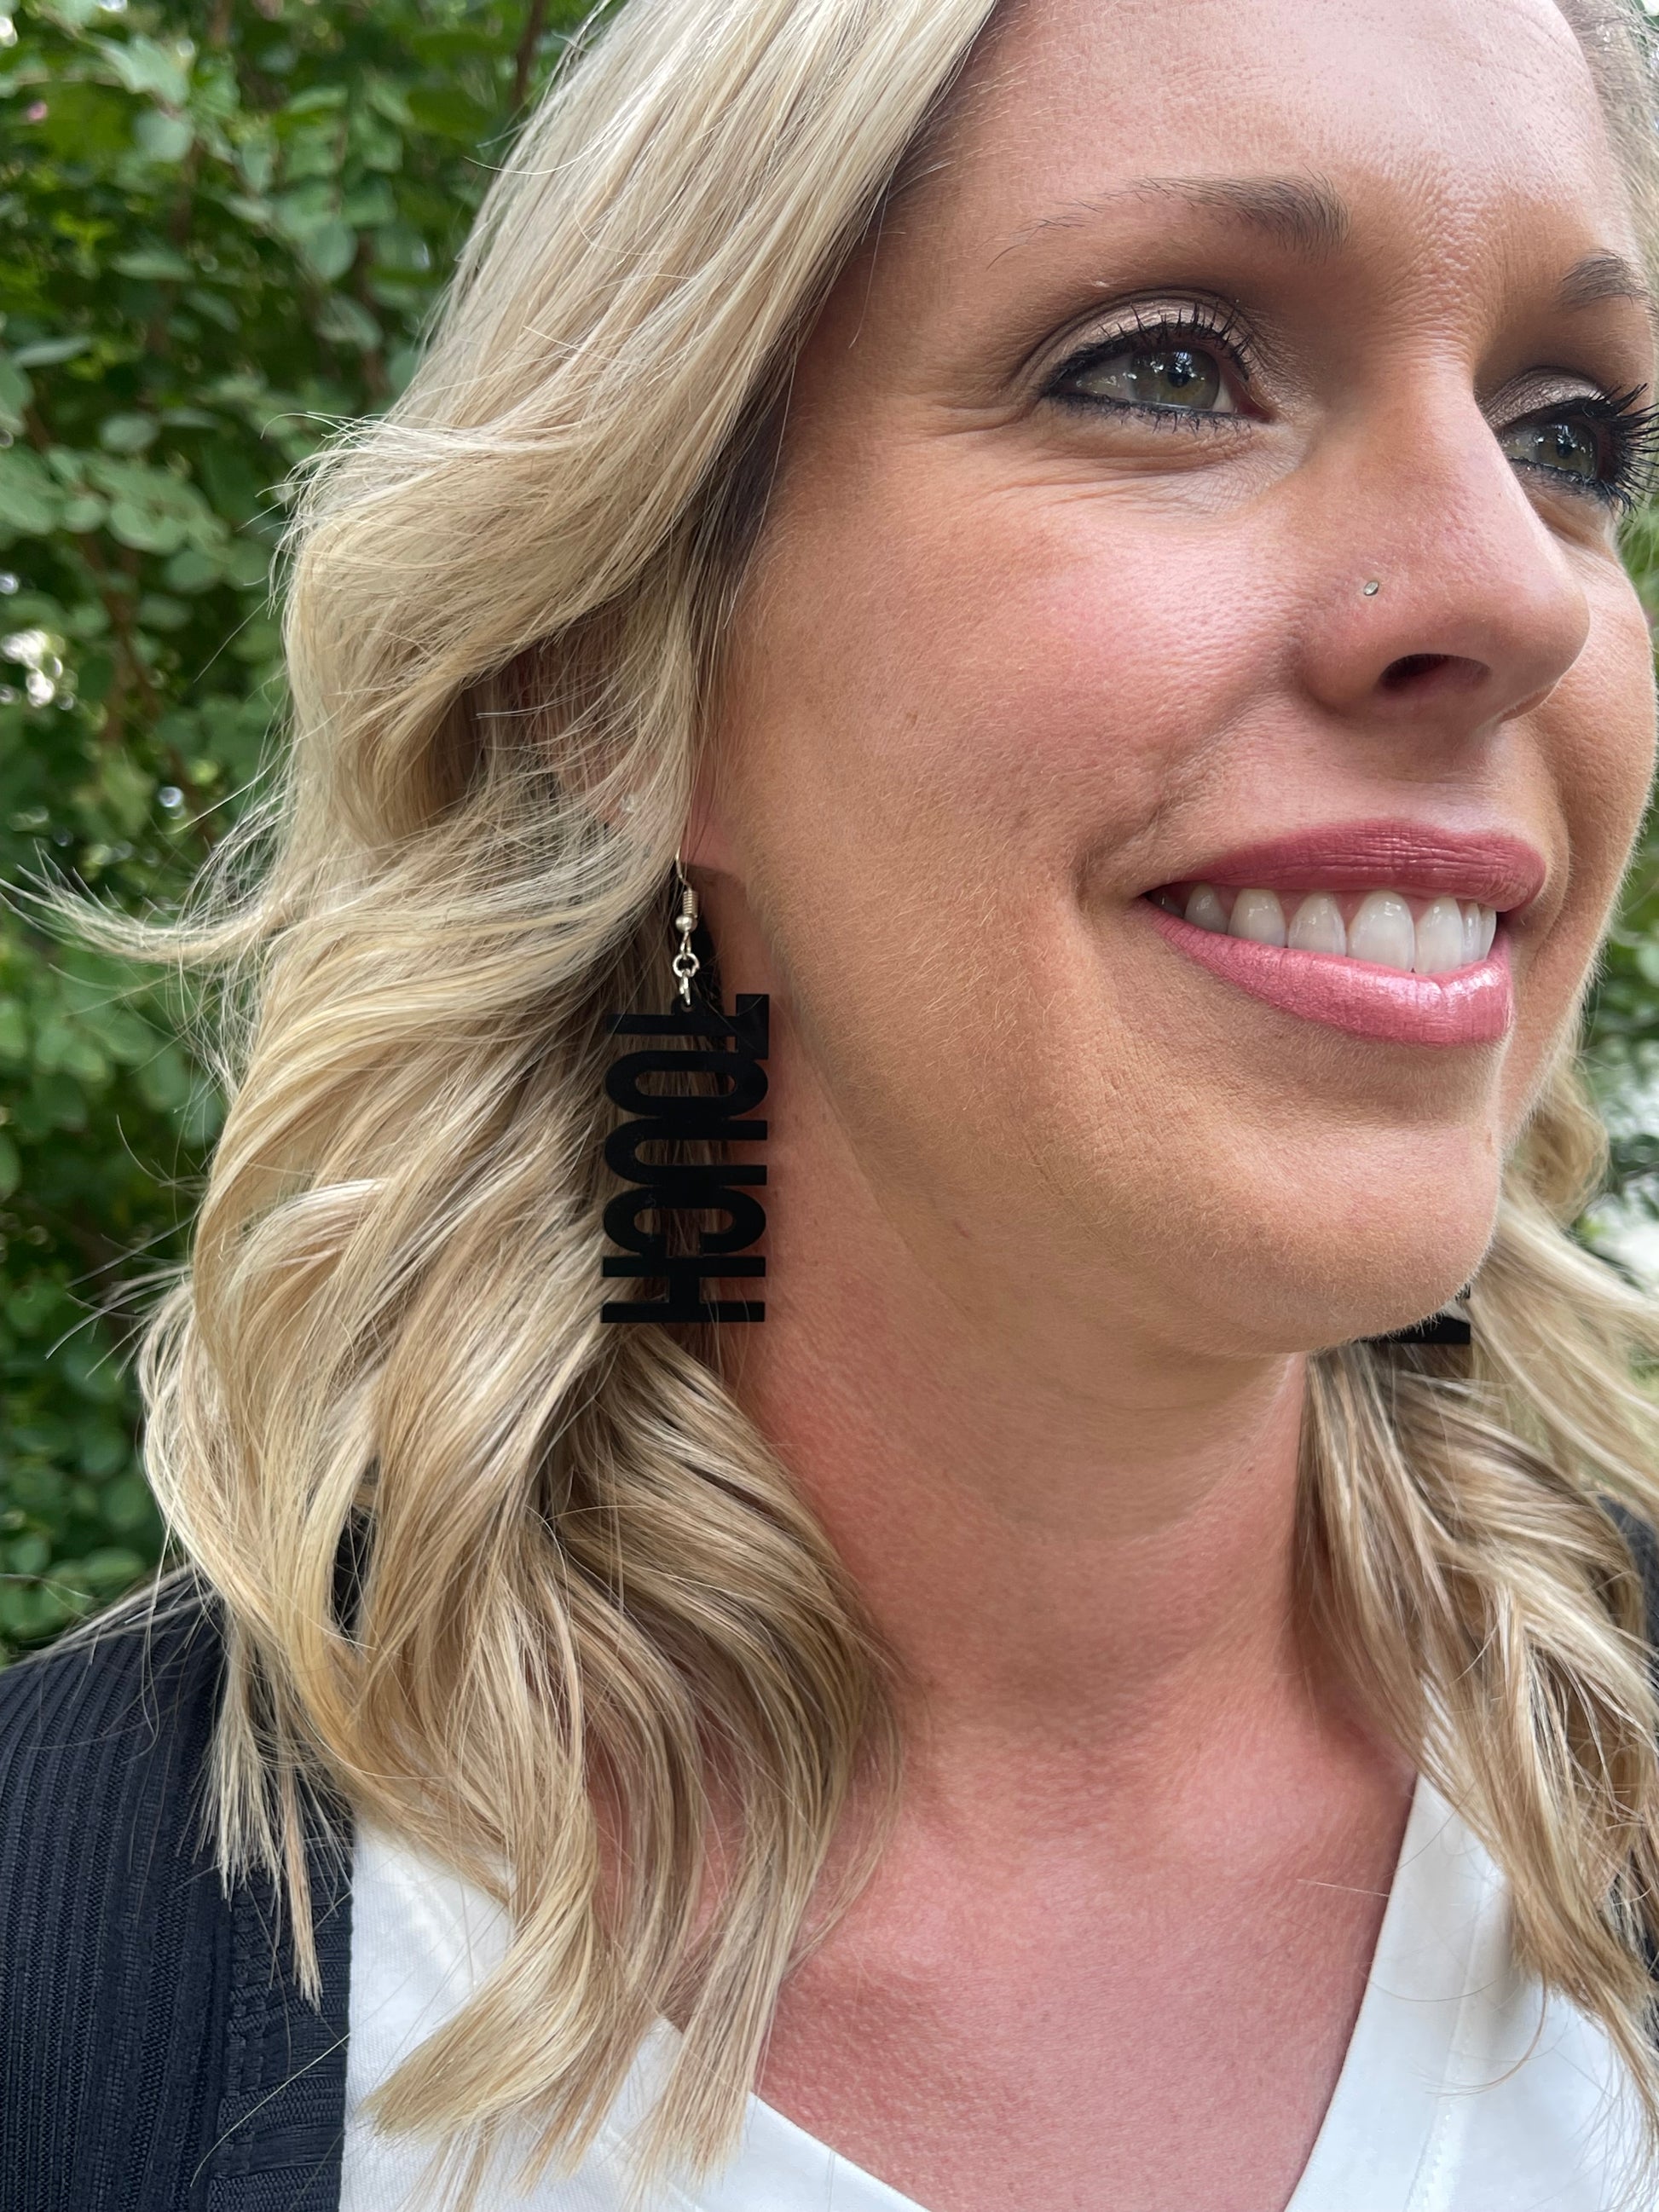 Woman wearing earring that says TOUCH 